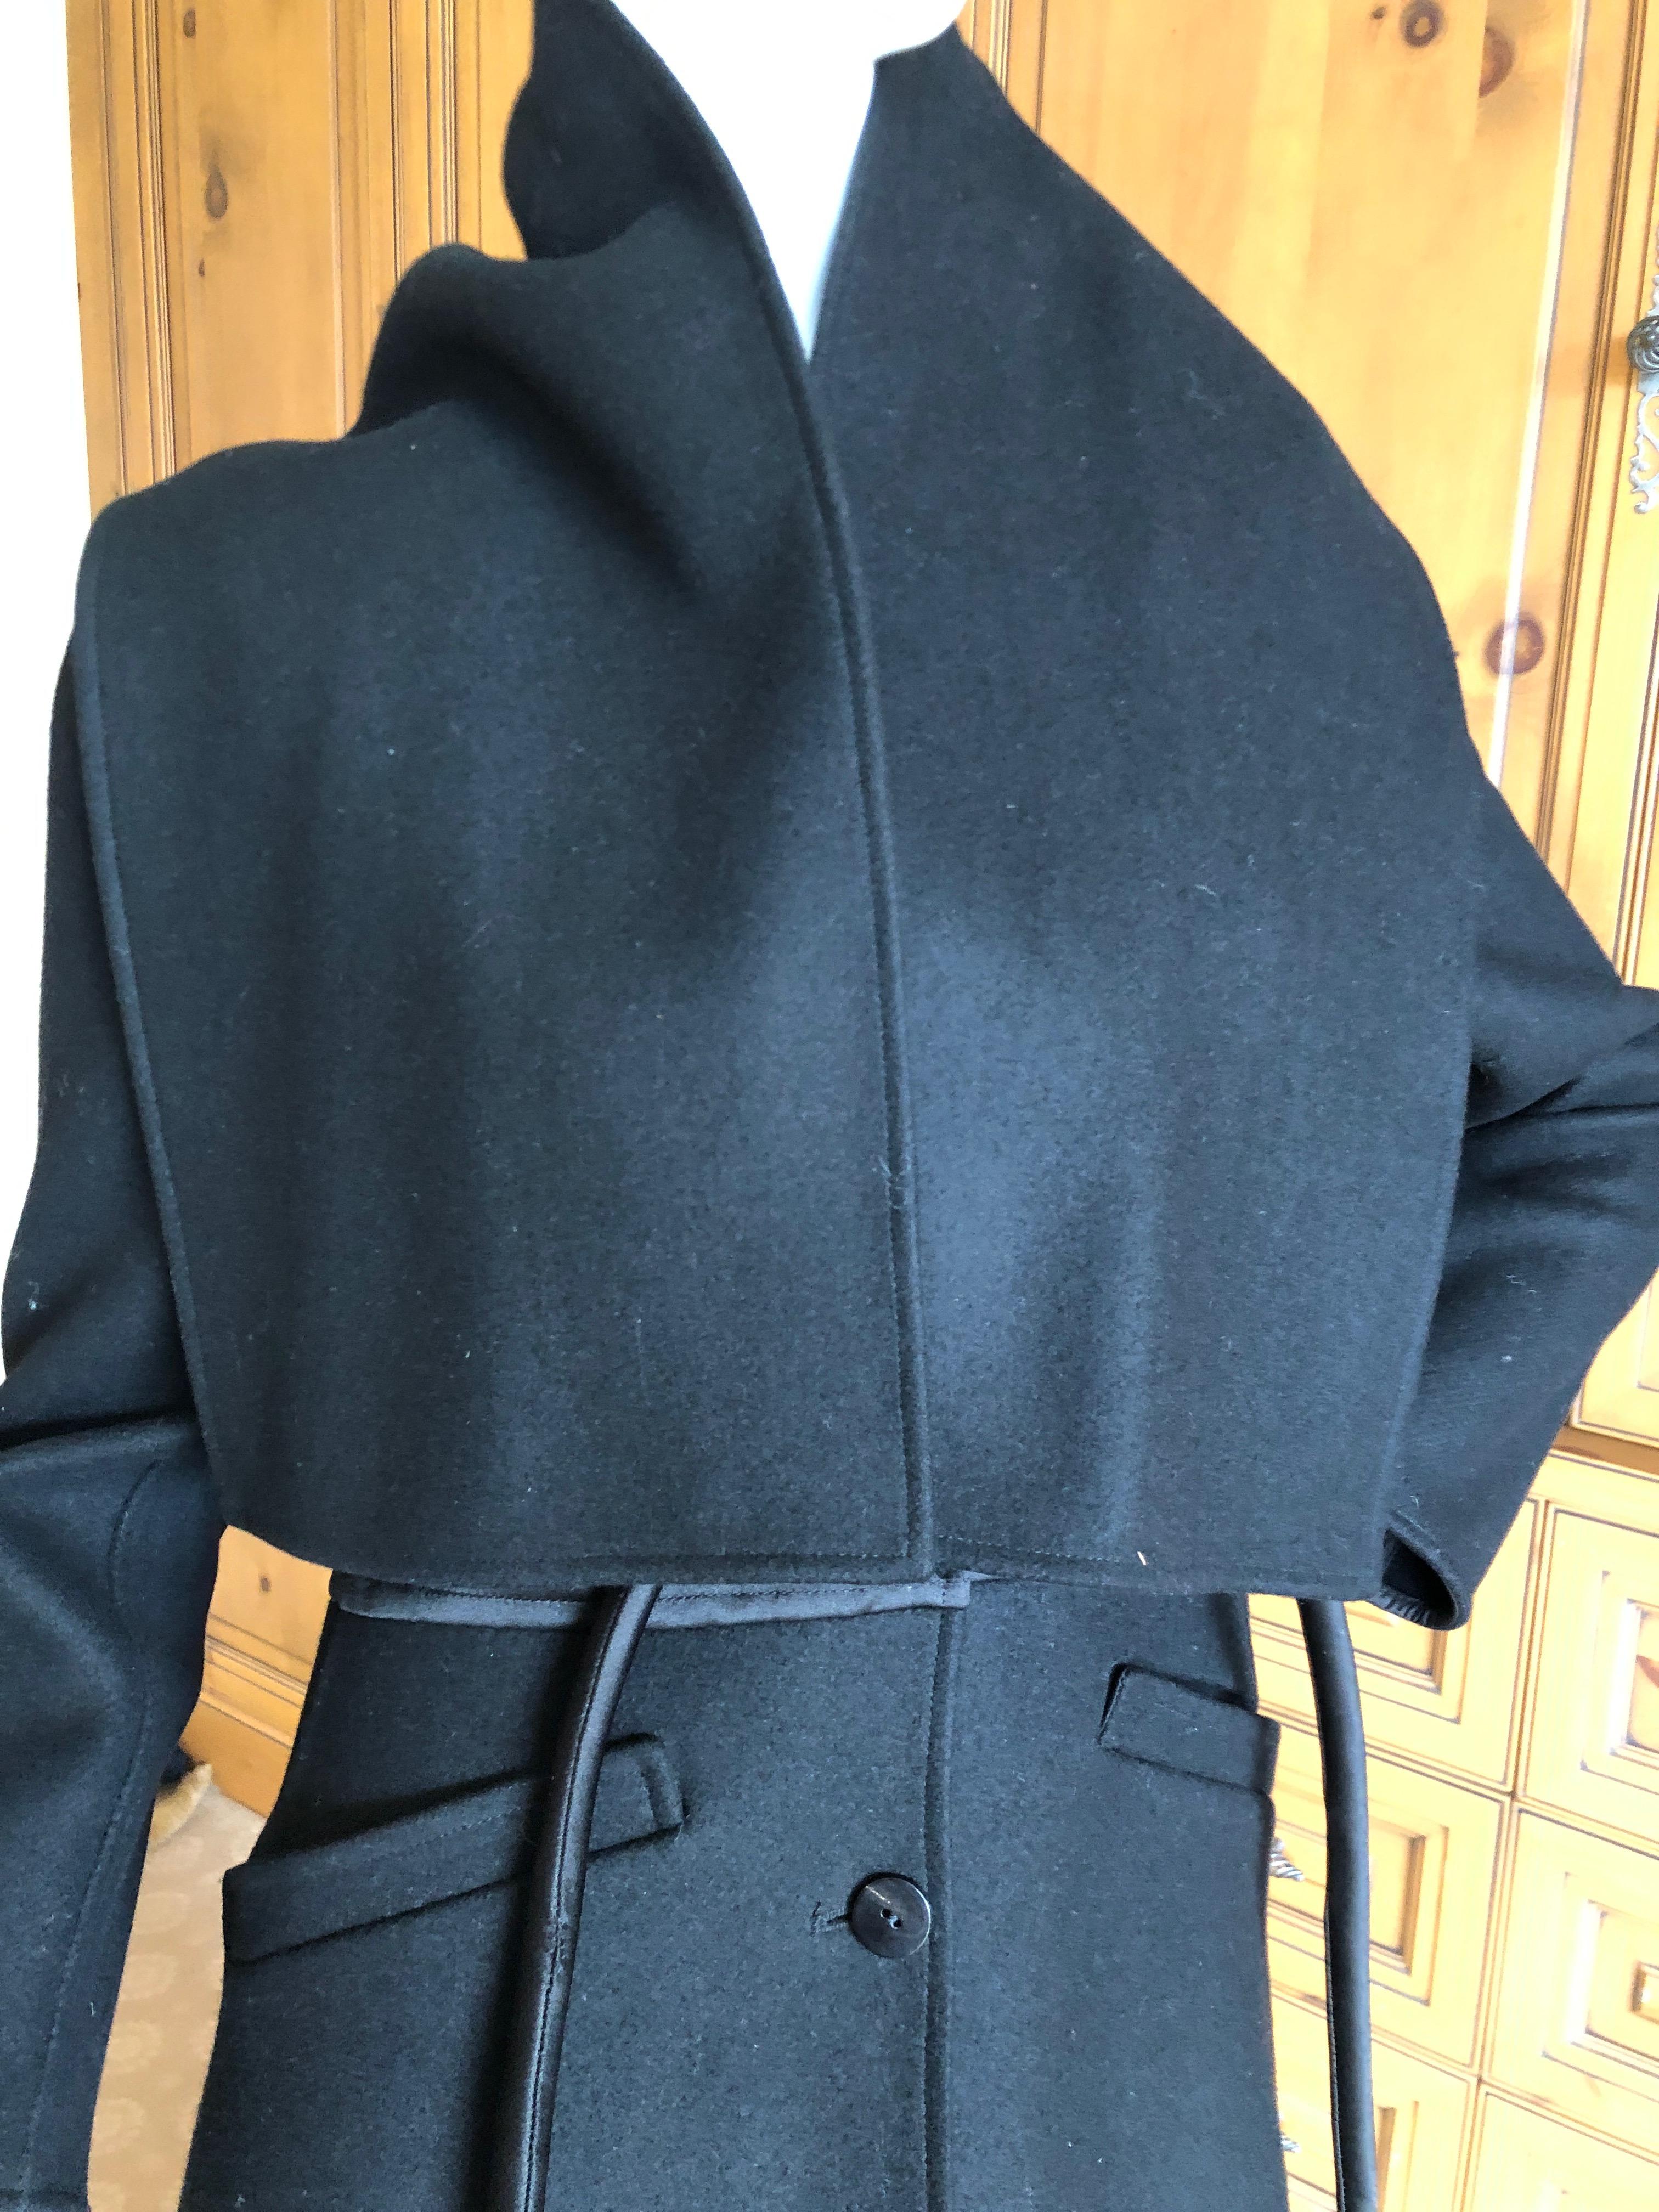 Chado Ralph Rucci Luxurious Long Black Coat with Obi Belt and Tassel Tie XS For Sale 5